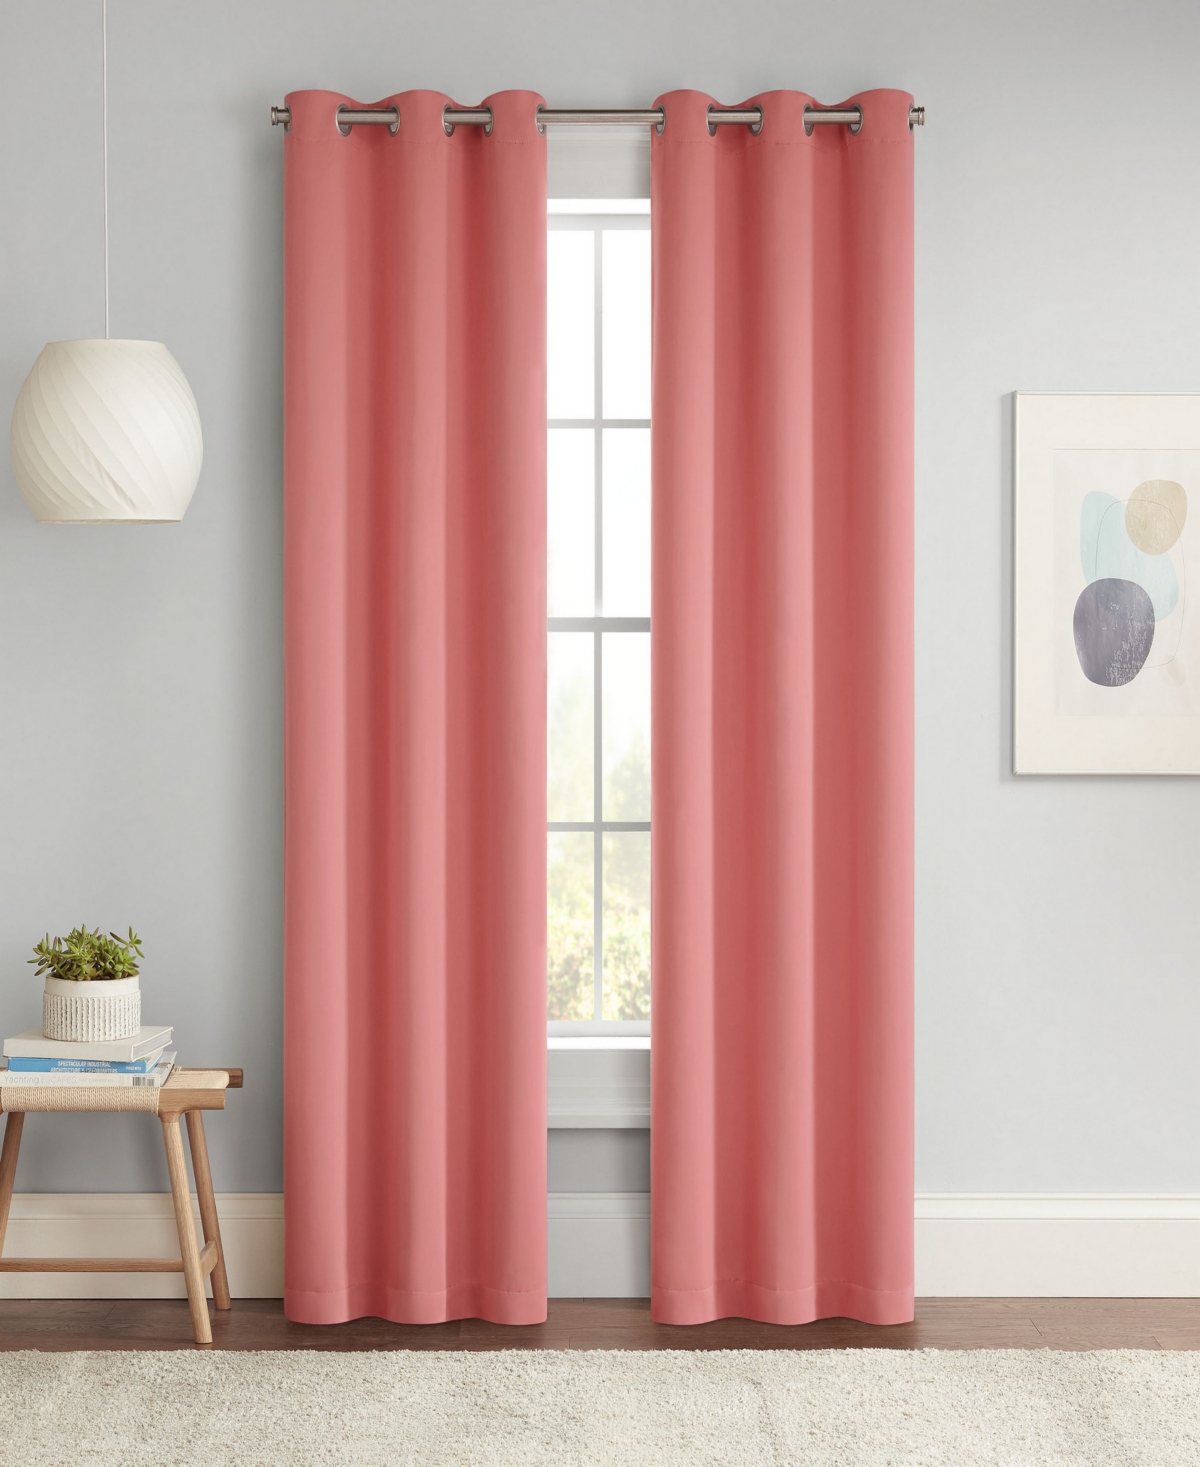 Eclipse Darrell Energy Saving Blackout Grommet Curtain Panel, 54" X 37" In Coral